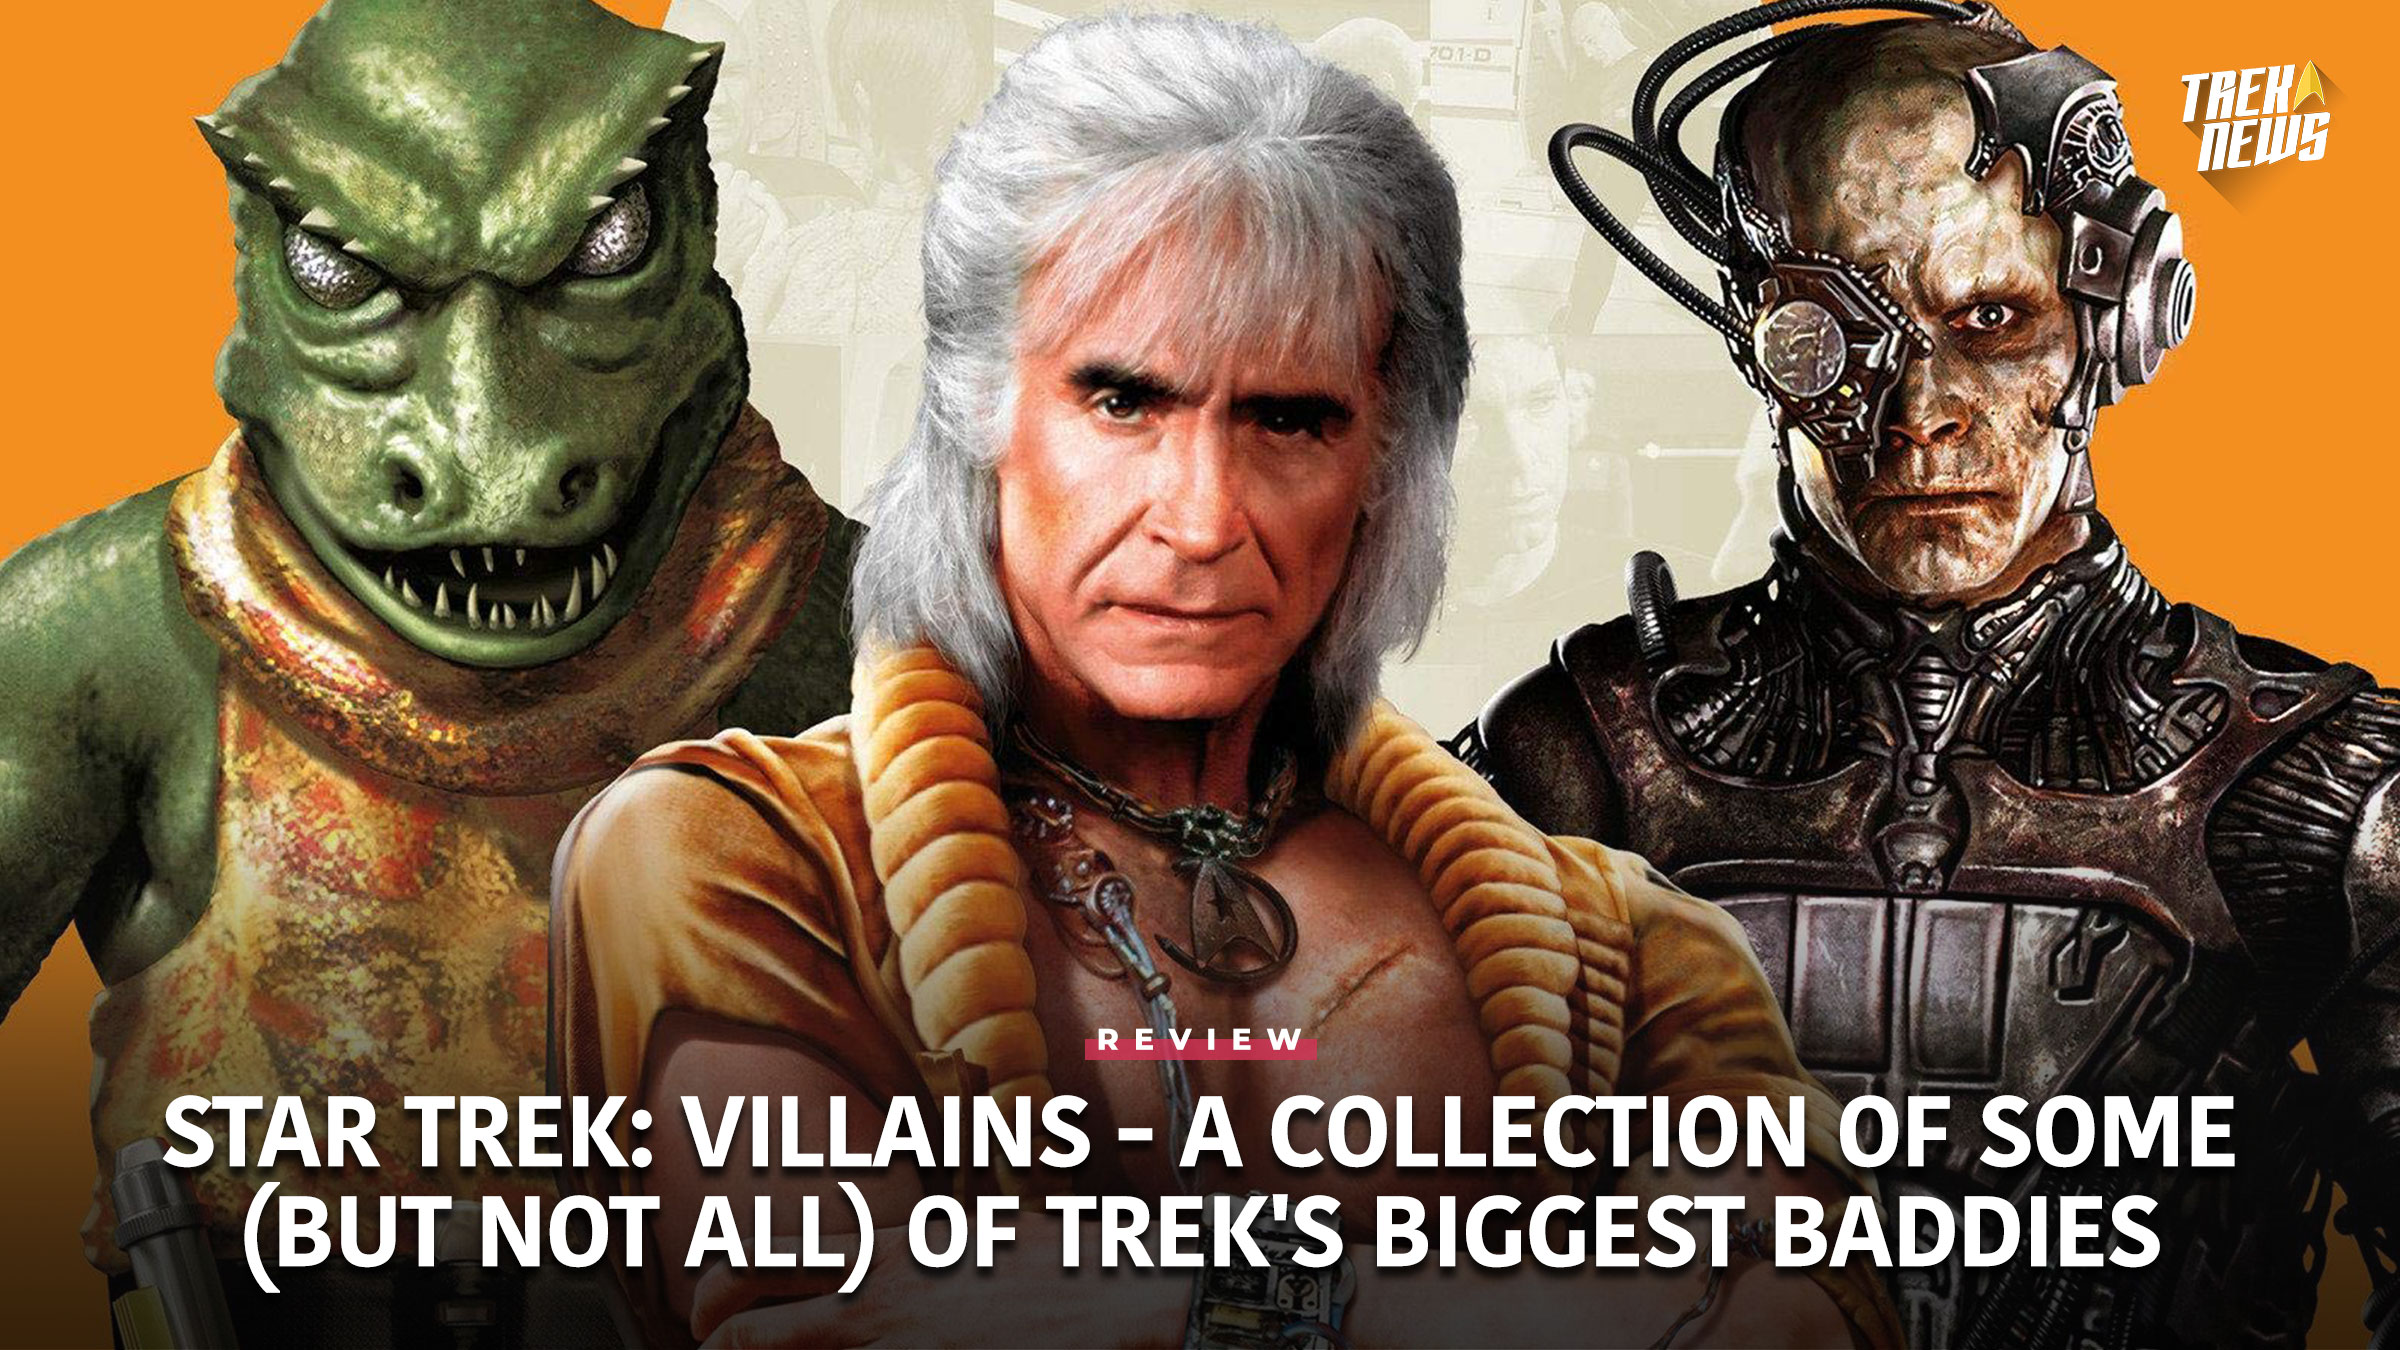 Star Trek: Villains Review: A Collection Of Some (But Not All) Of Trek’s Biggest Baddies